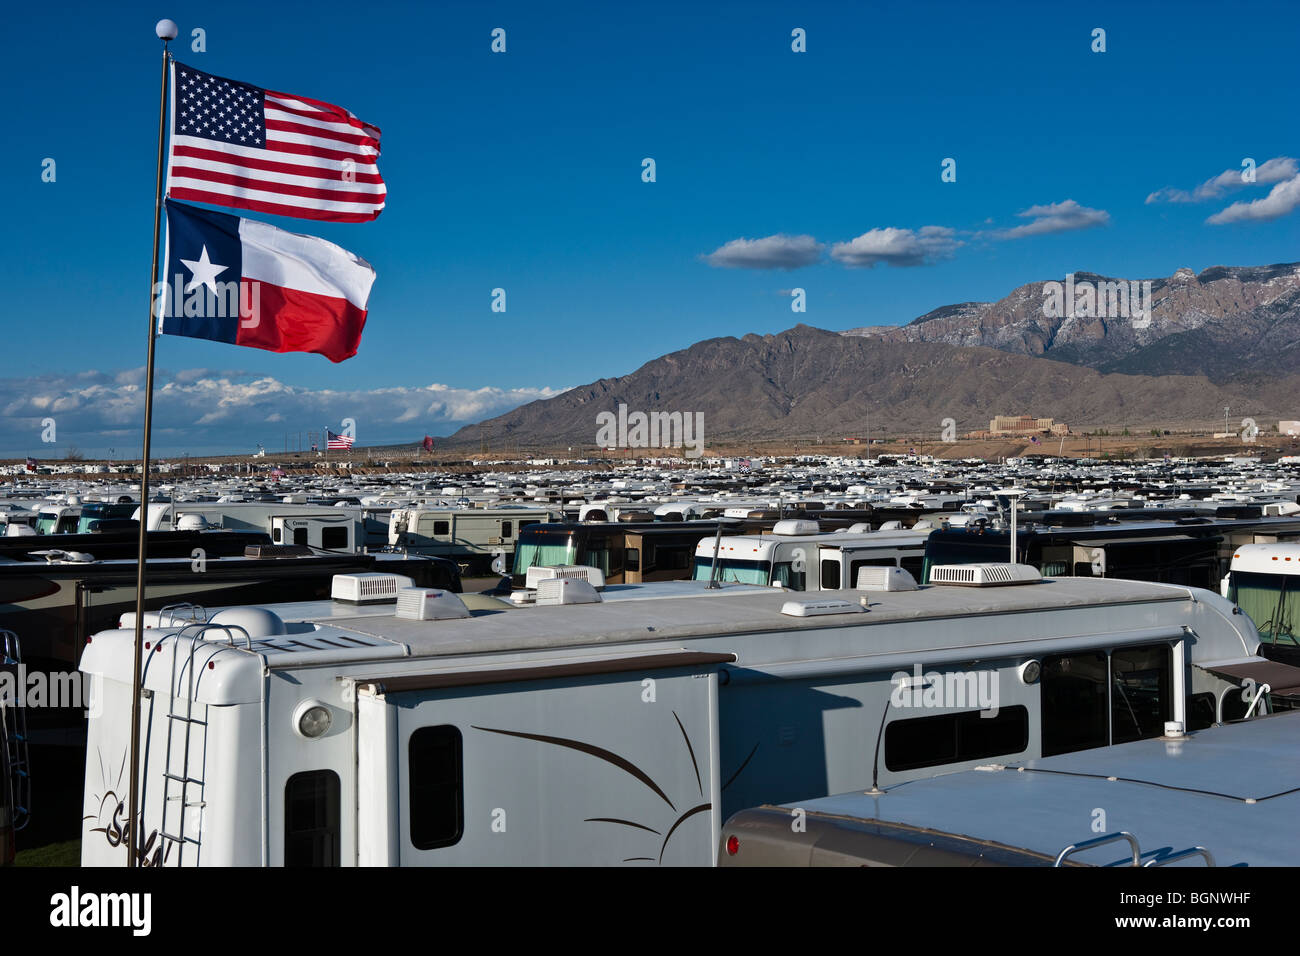 Large gathering of 2300 RV rigs at 'The Rally'. Albuquerque, New Mexico, USA. Stock Photo